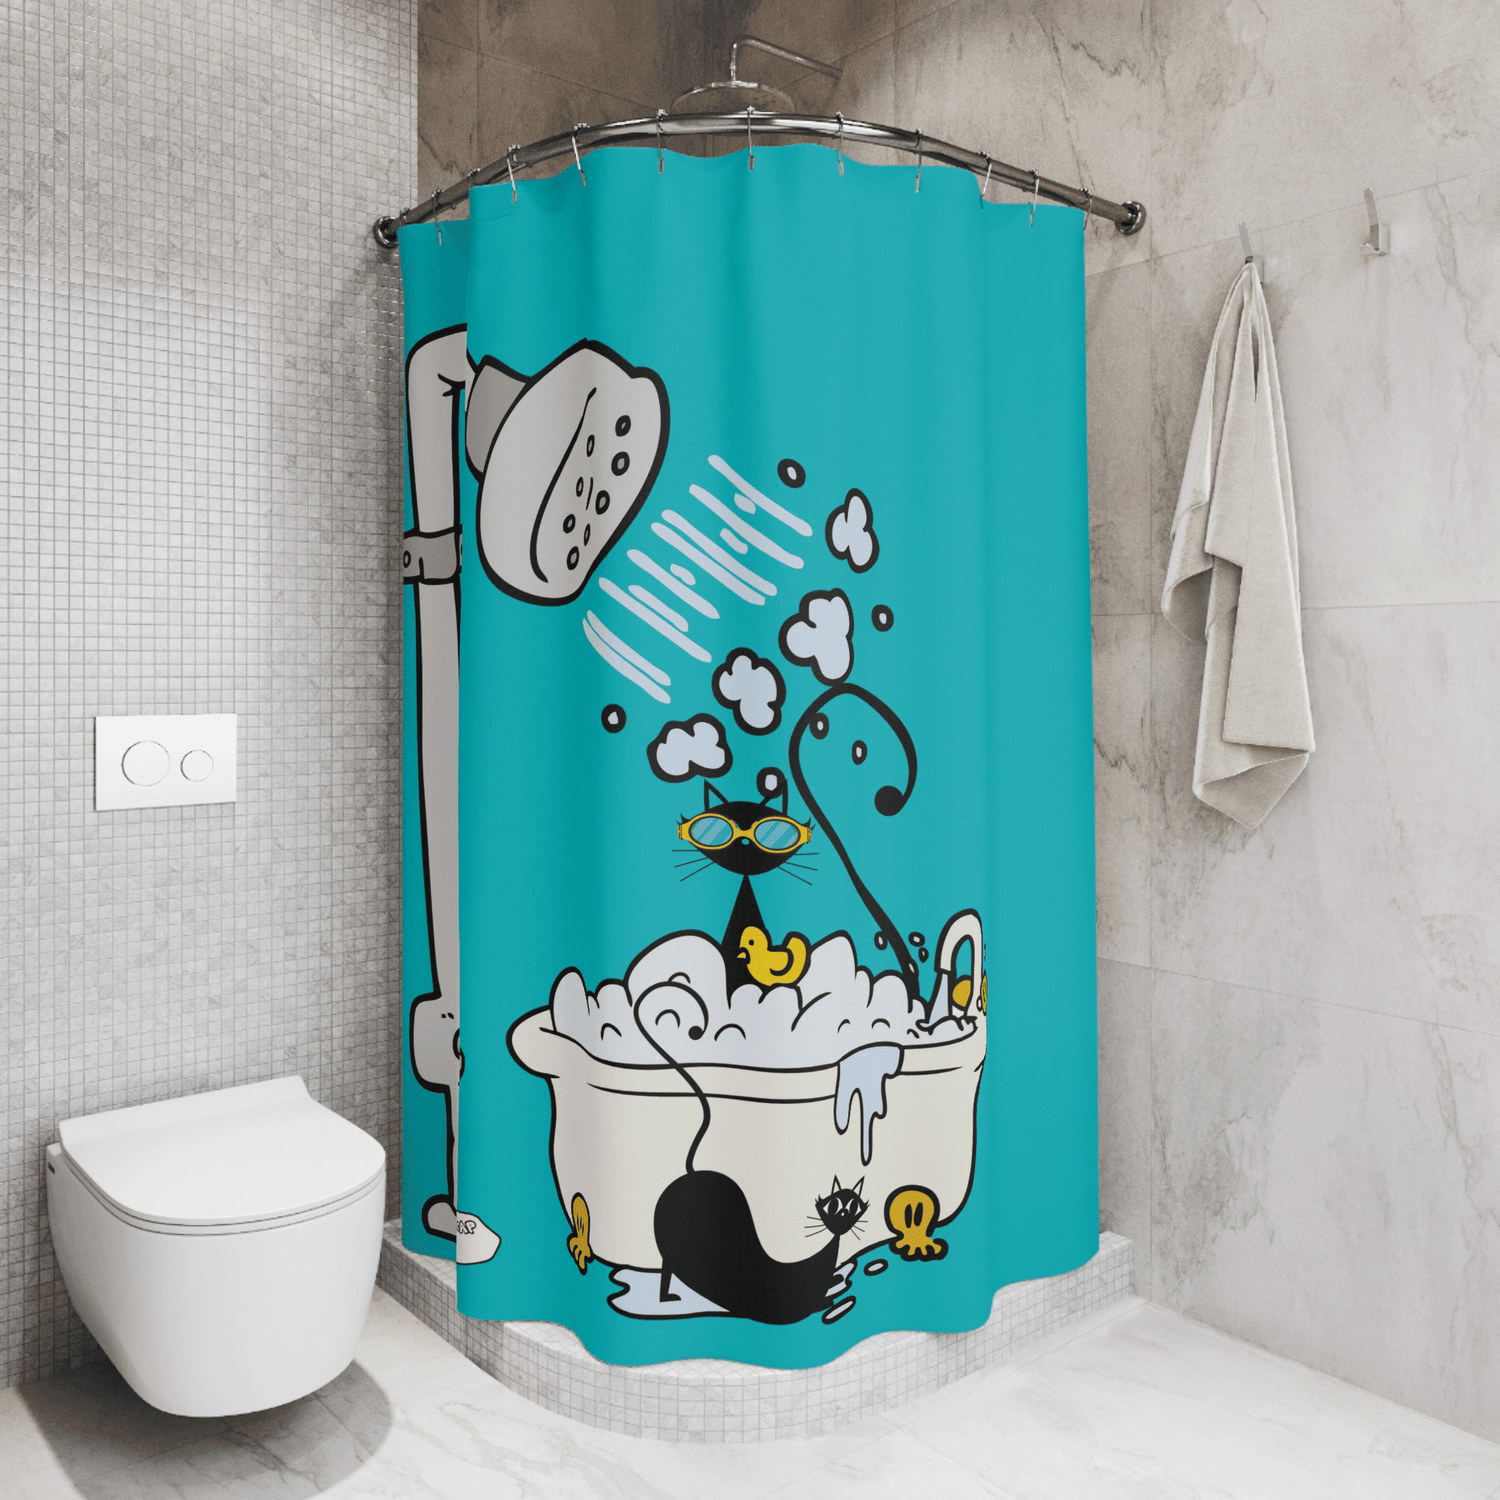 Where to Buy Cute, Stylish Bathroom Accessories